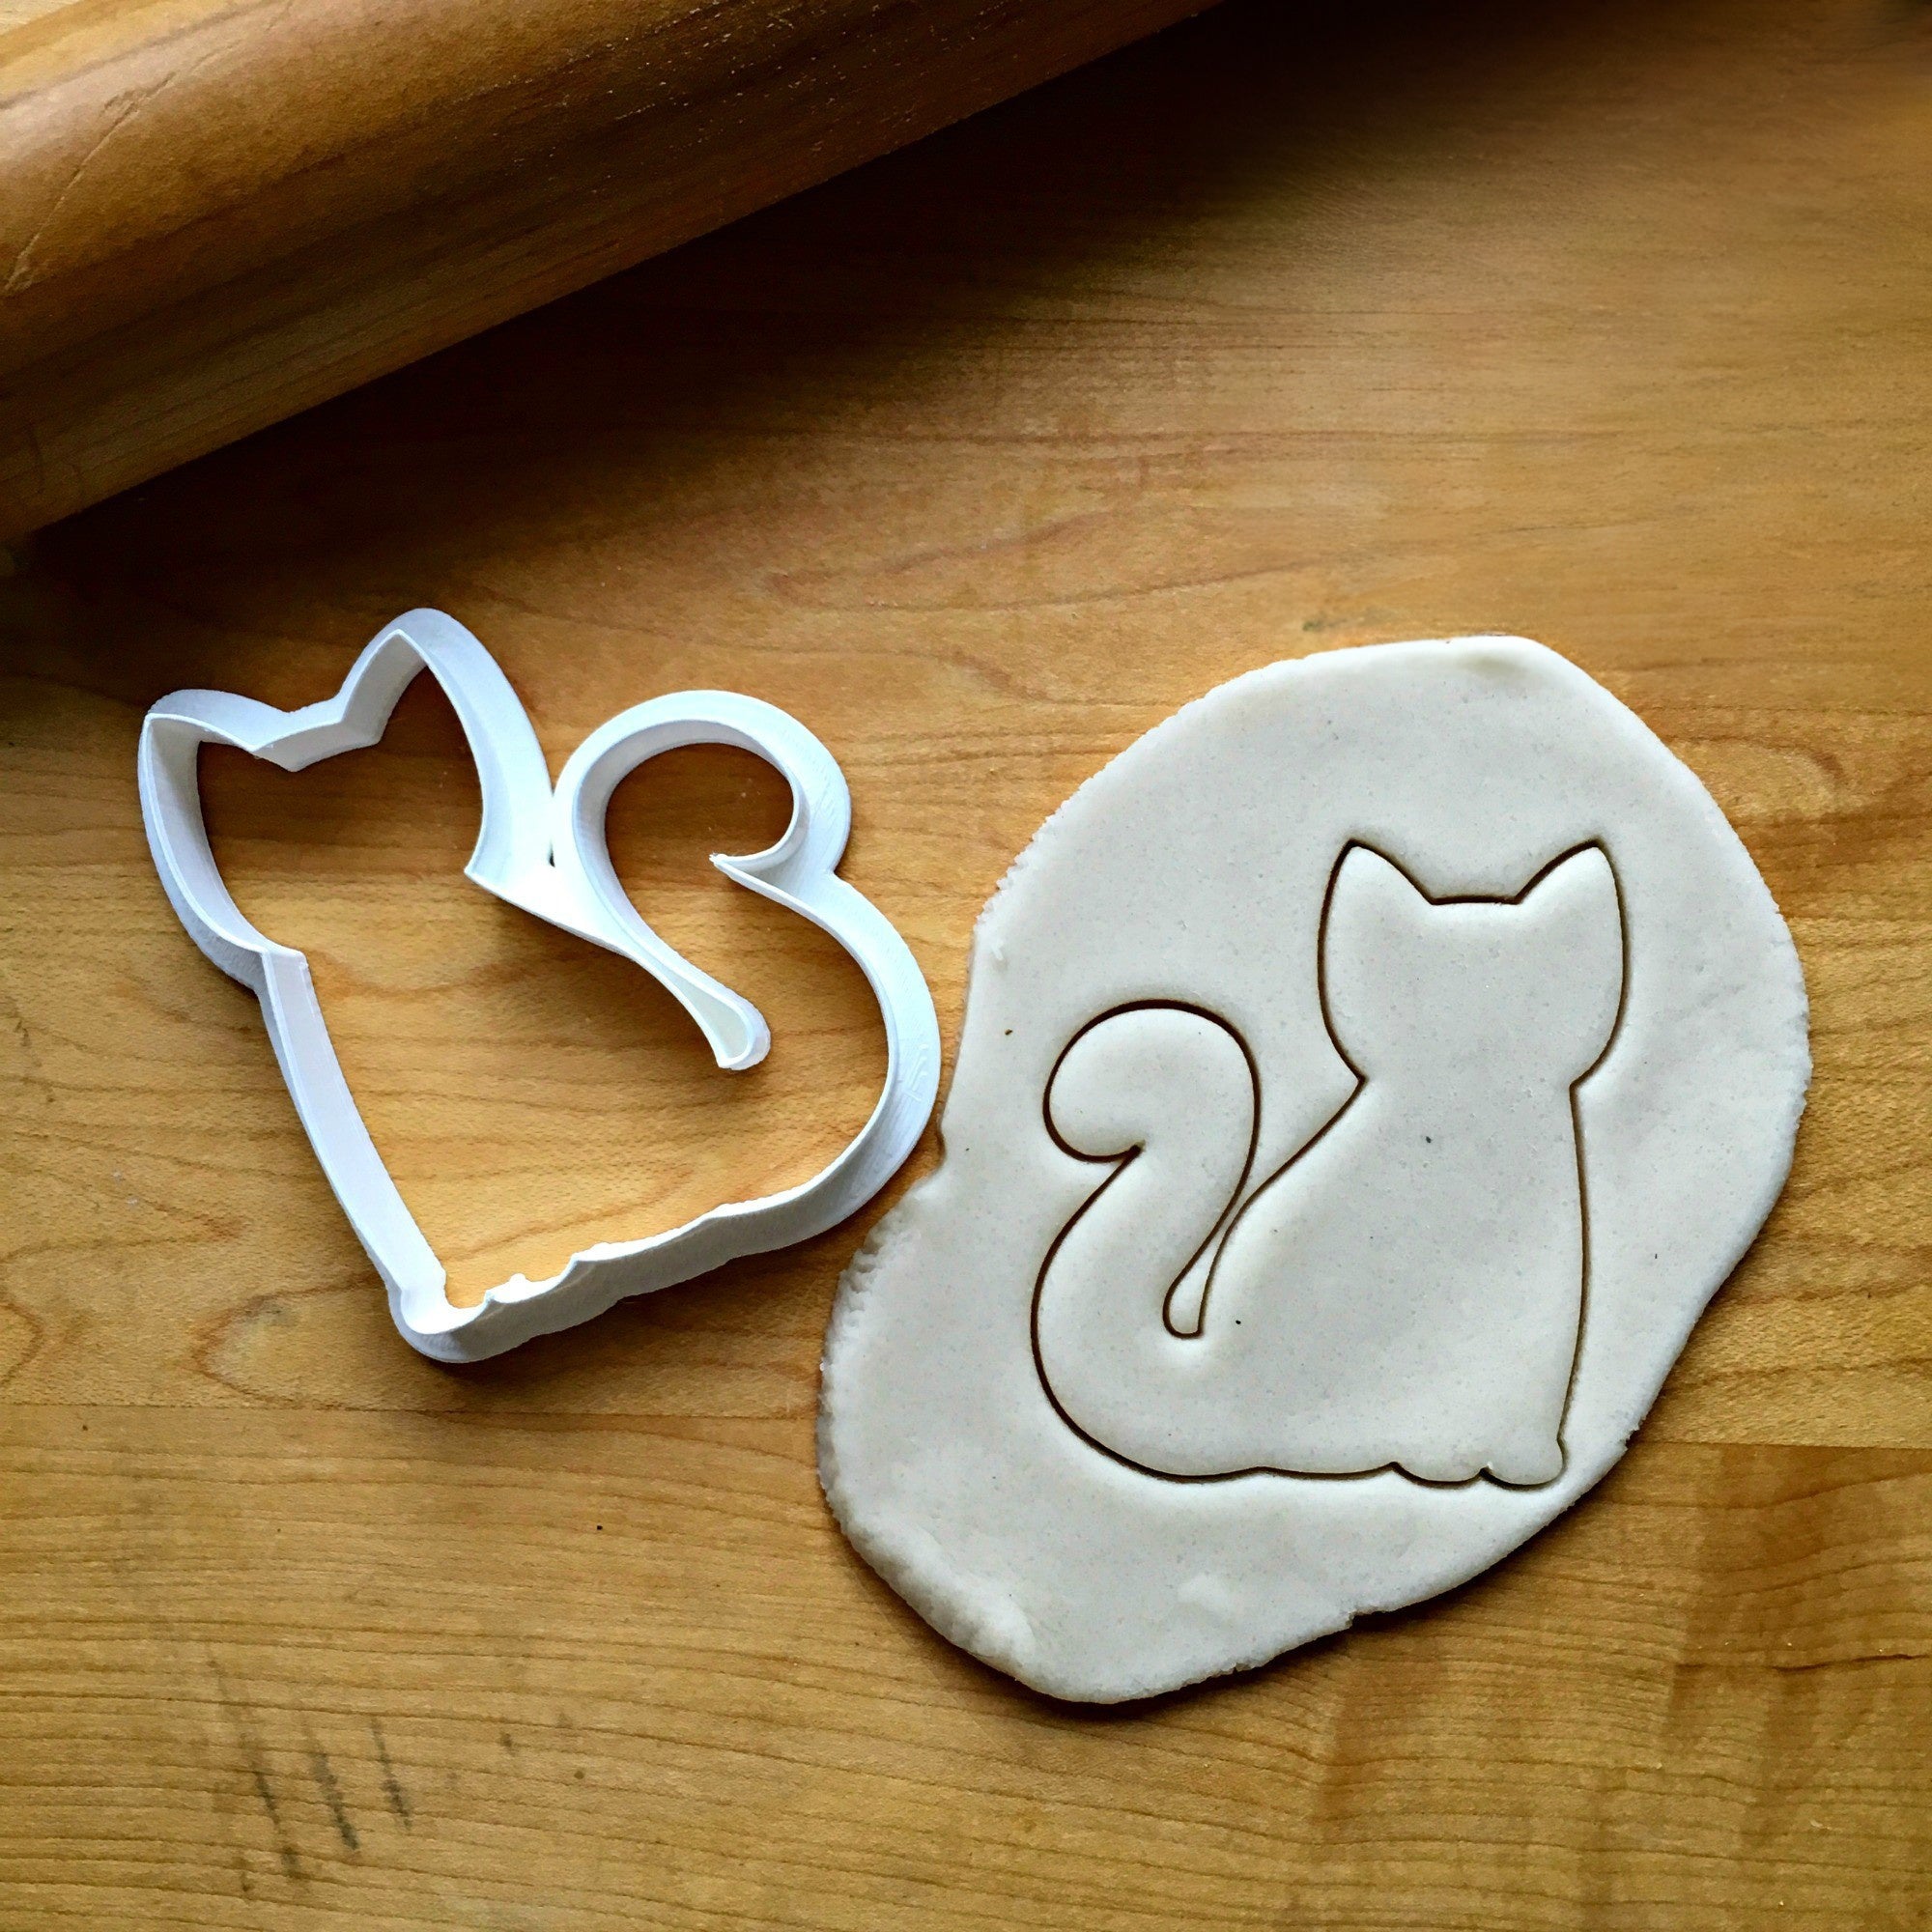 Kitty Cat Cookie Cutter/Dishwasher Safe